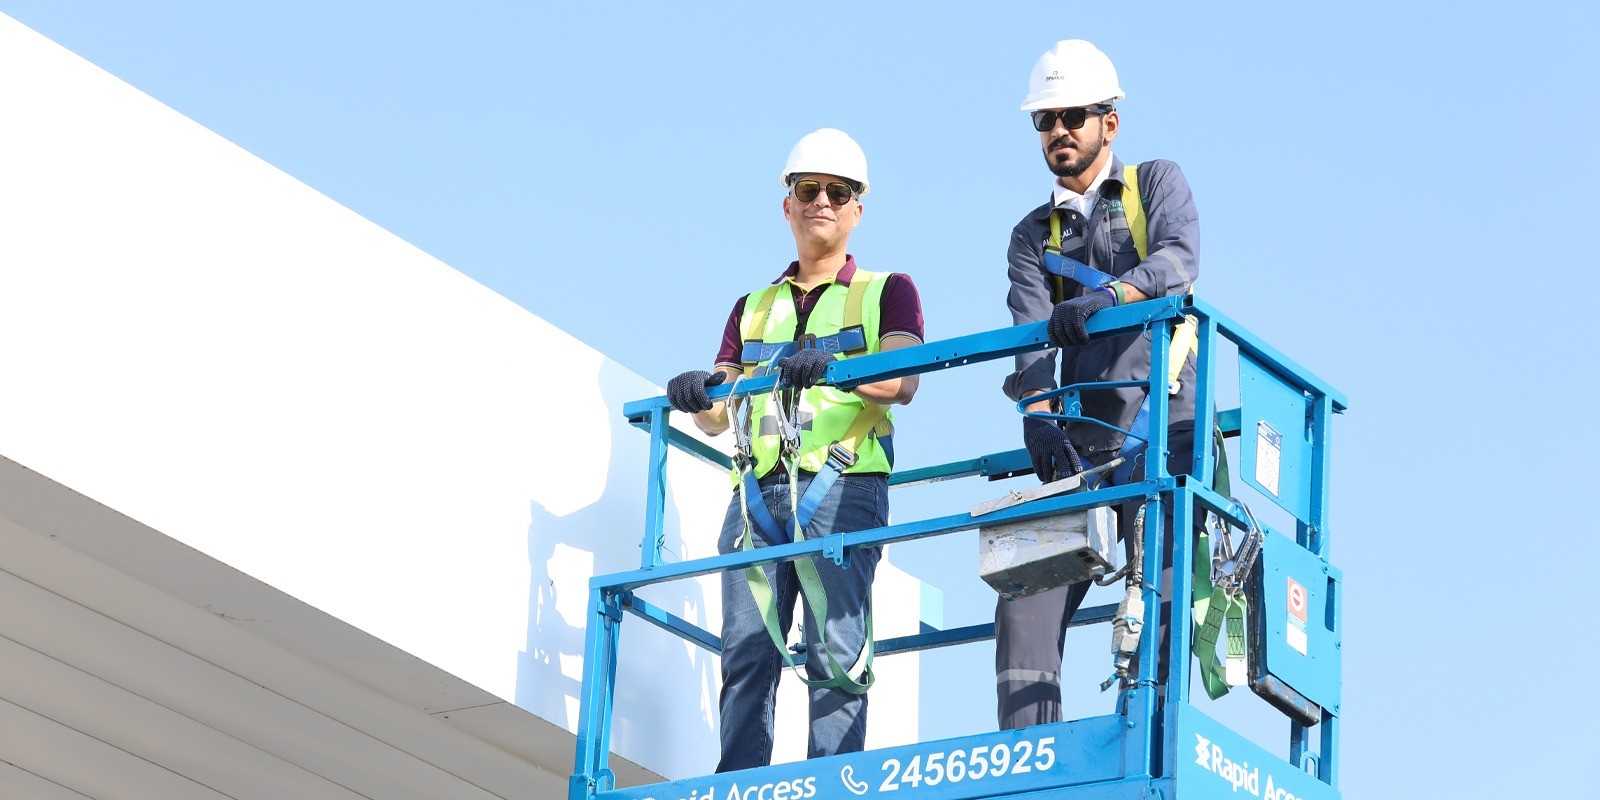 OMAN OIL MARKETING COMPANY HOSTS ANNUAL OCCUPATIONAL HEALTH AND SAFETY WEEK